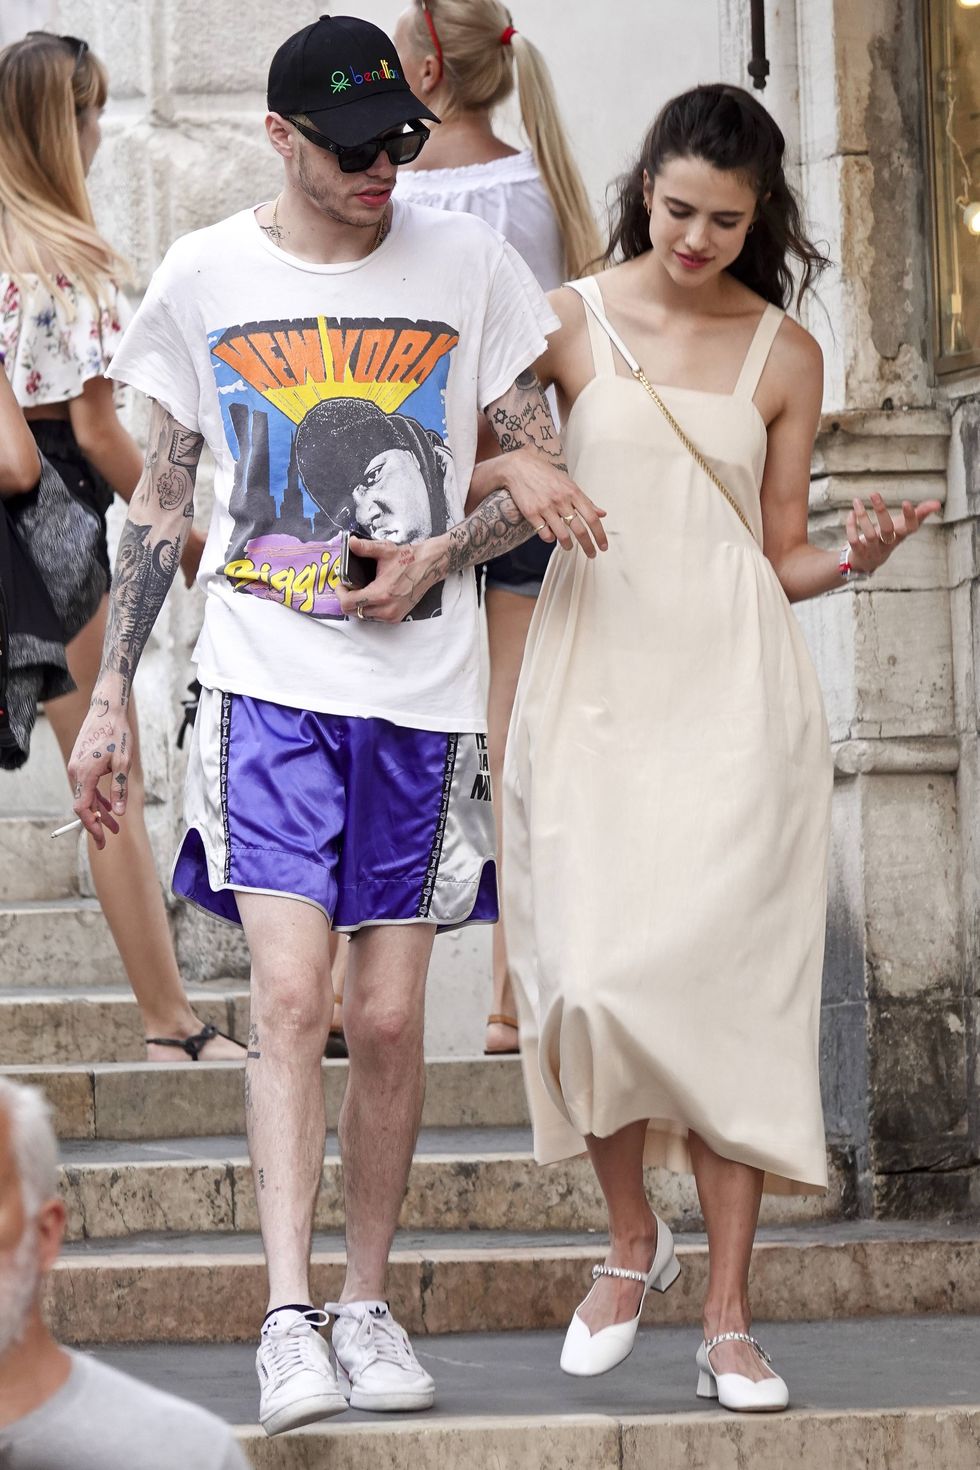 margaret qualley spotted with pete davidson hand in hand in the streets of venice 02 sep 2019 pictured margaret qualley,pete davidson photo credit ama  mega themegaagencycom 1 888 505 6342